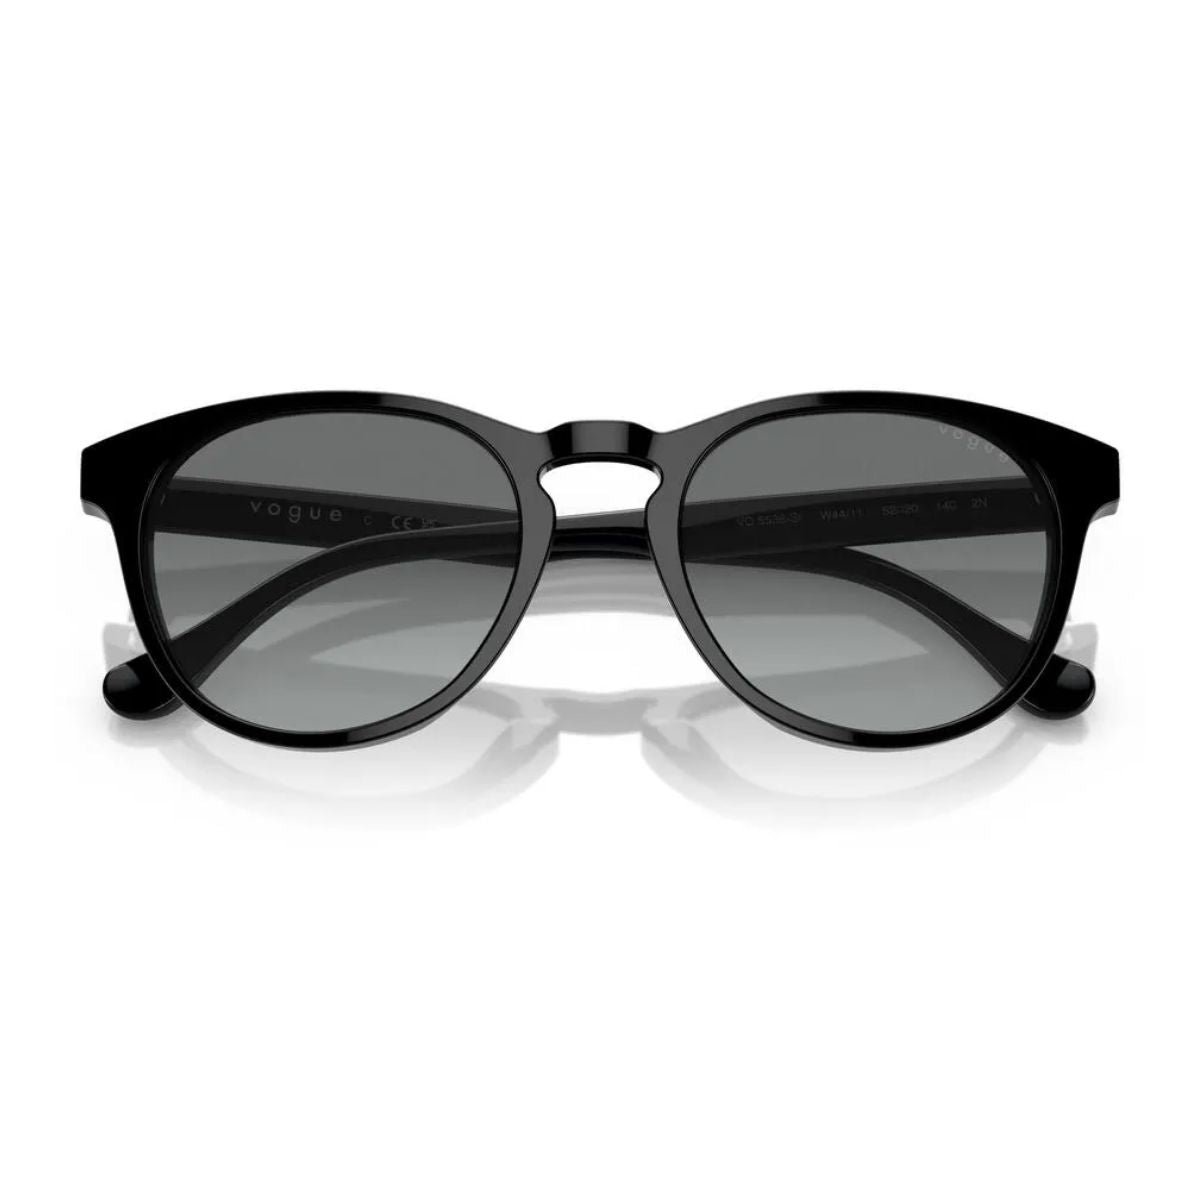 "Shop Vogue UV Protection Goggles For Ladies At Optorium Online Store | Offer Sunglasses"